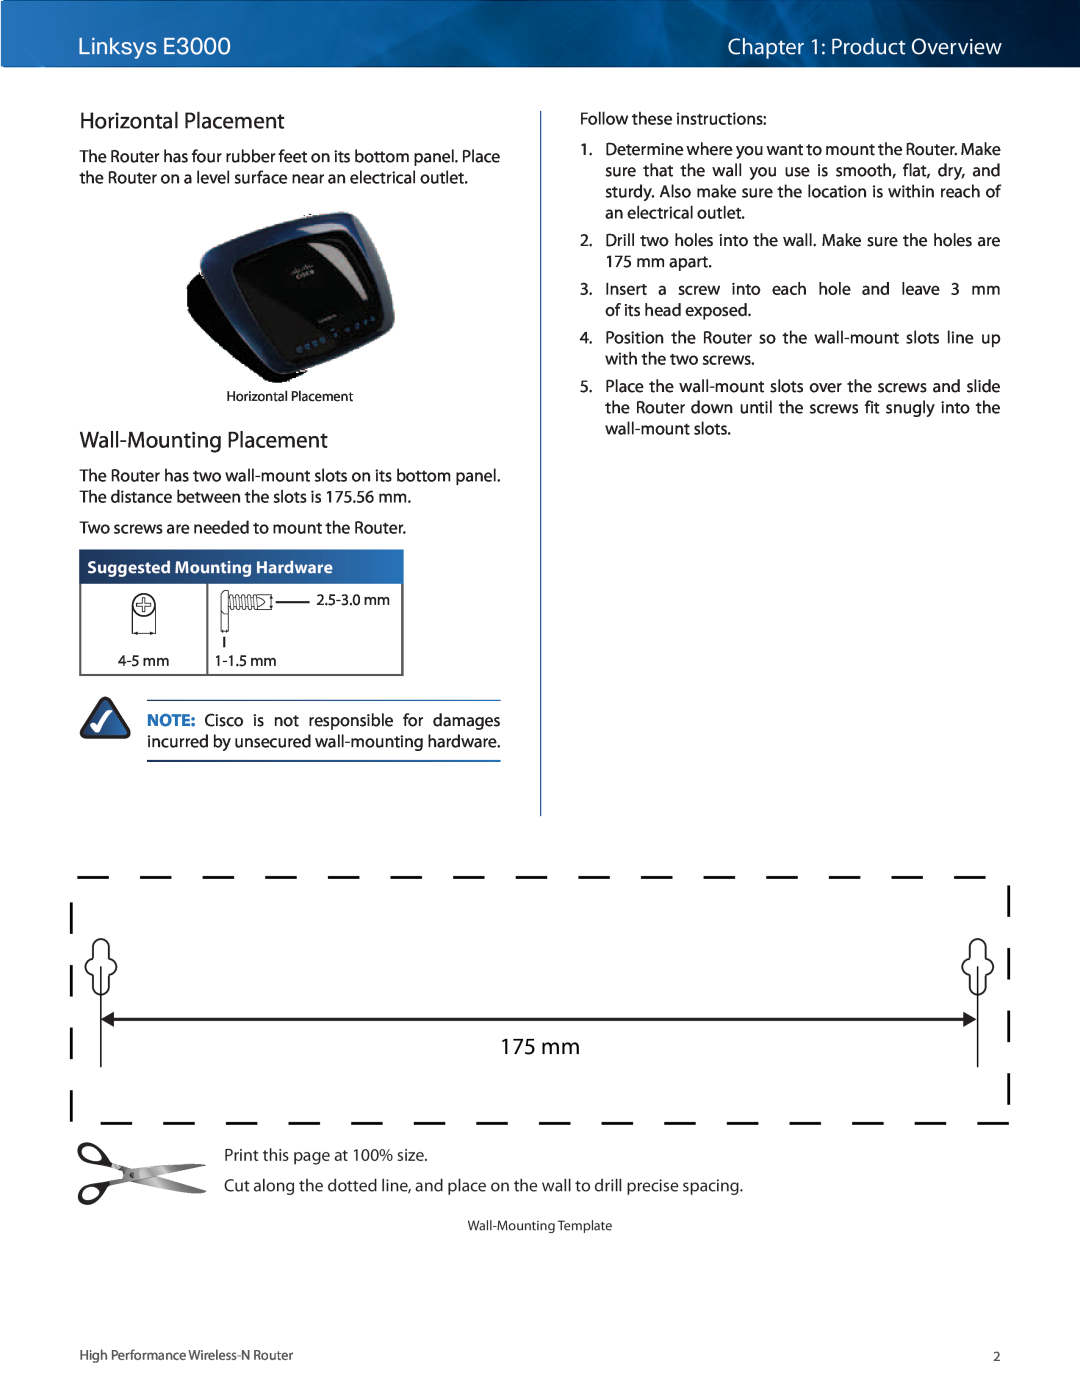 Linksys manual 175 mm, Horizontal Placement, Wall-Mounting Placement, Suggested Mounting Hardware, Linksys E3000 